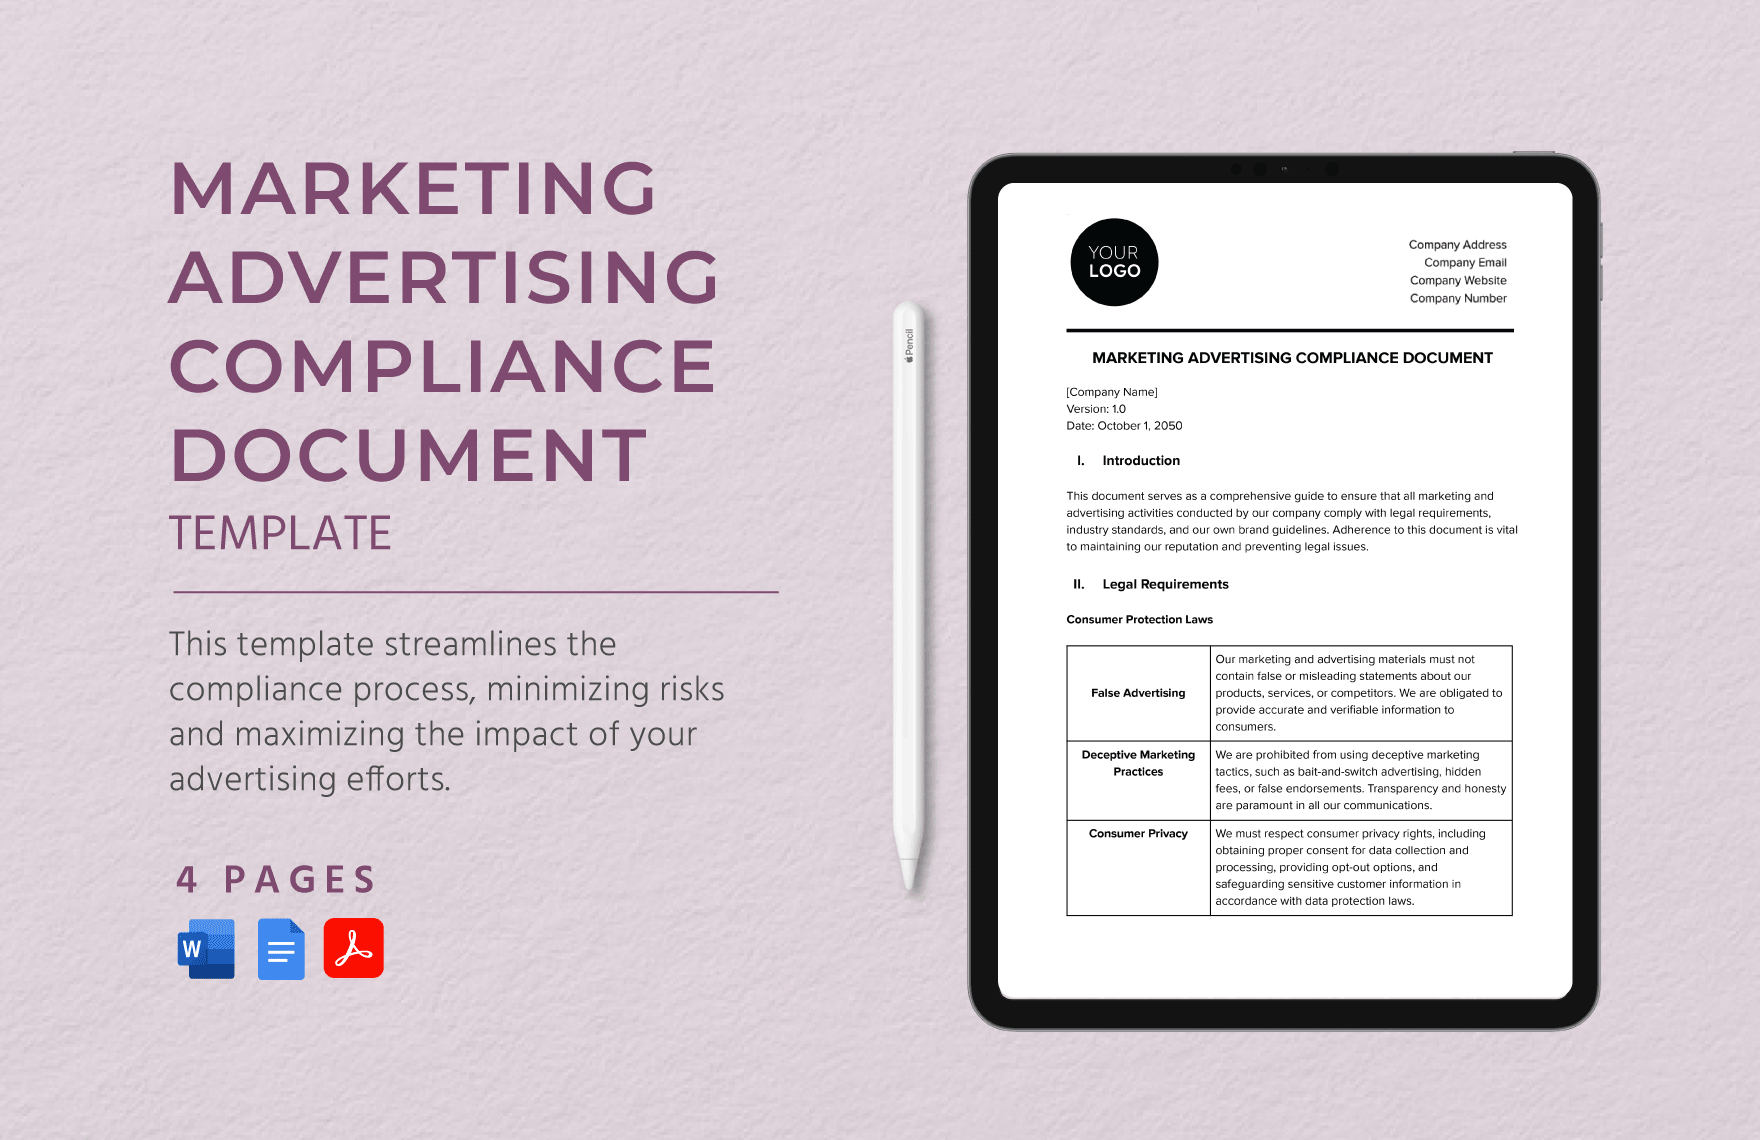 Marketing Advertising Compliance Document Template